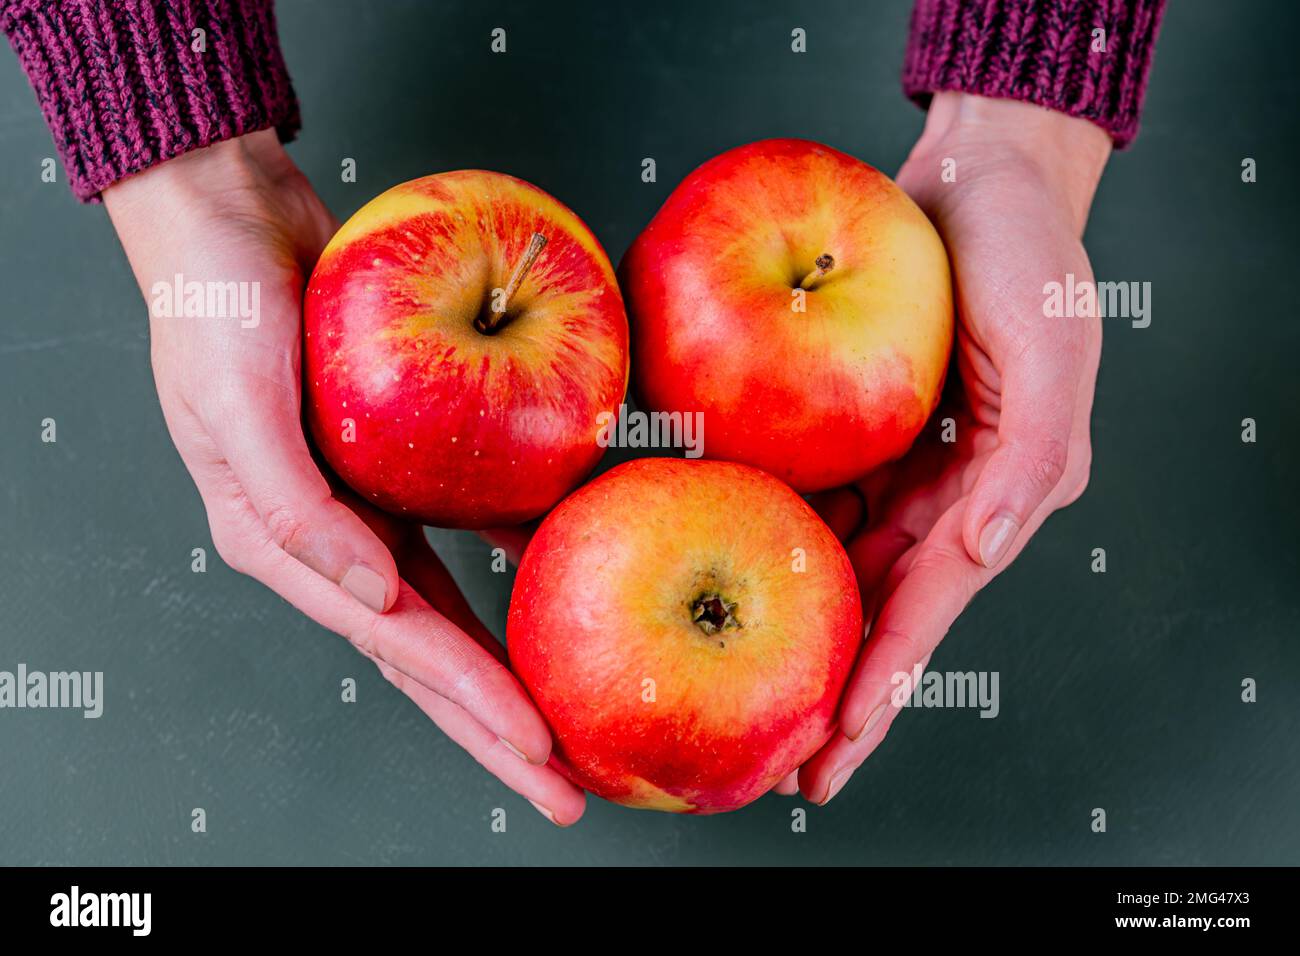 Three red fresh apples in woman hands. Green background. Stock Photo